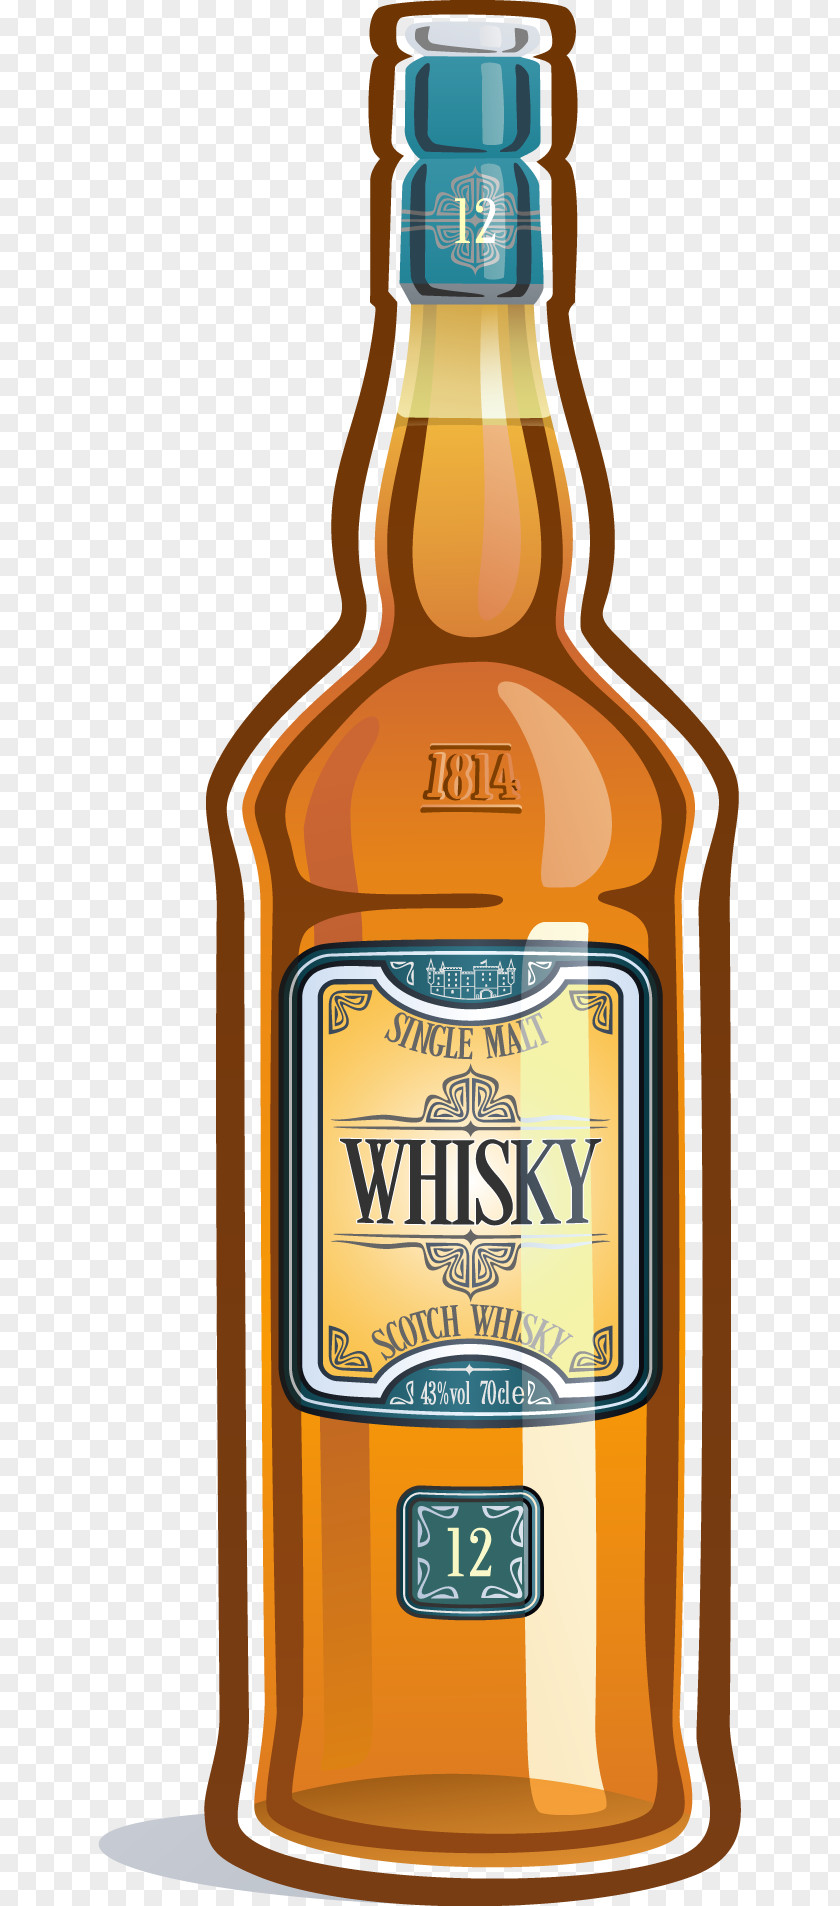 Decorative Bottles Whisky Beer Wine Tennessee Whiskey Liqueur PNG